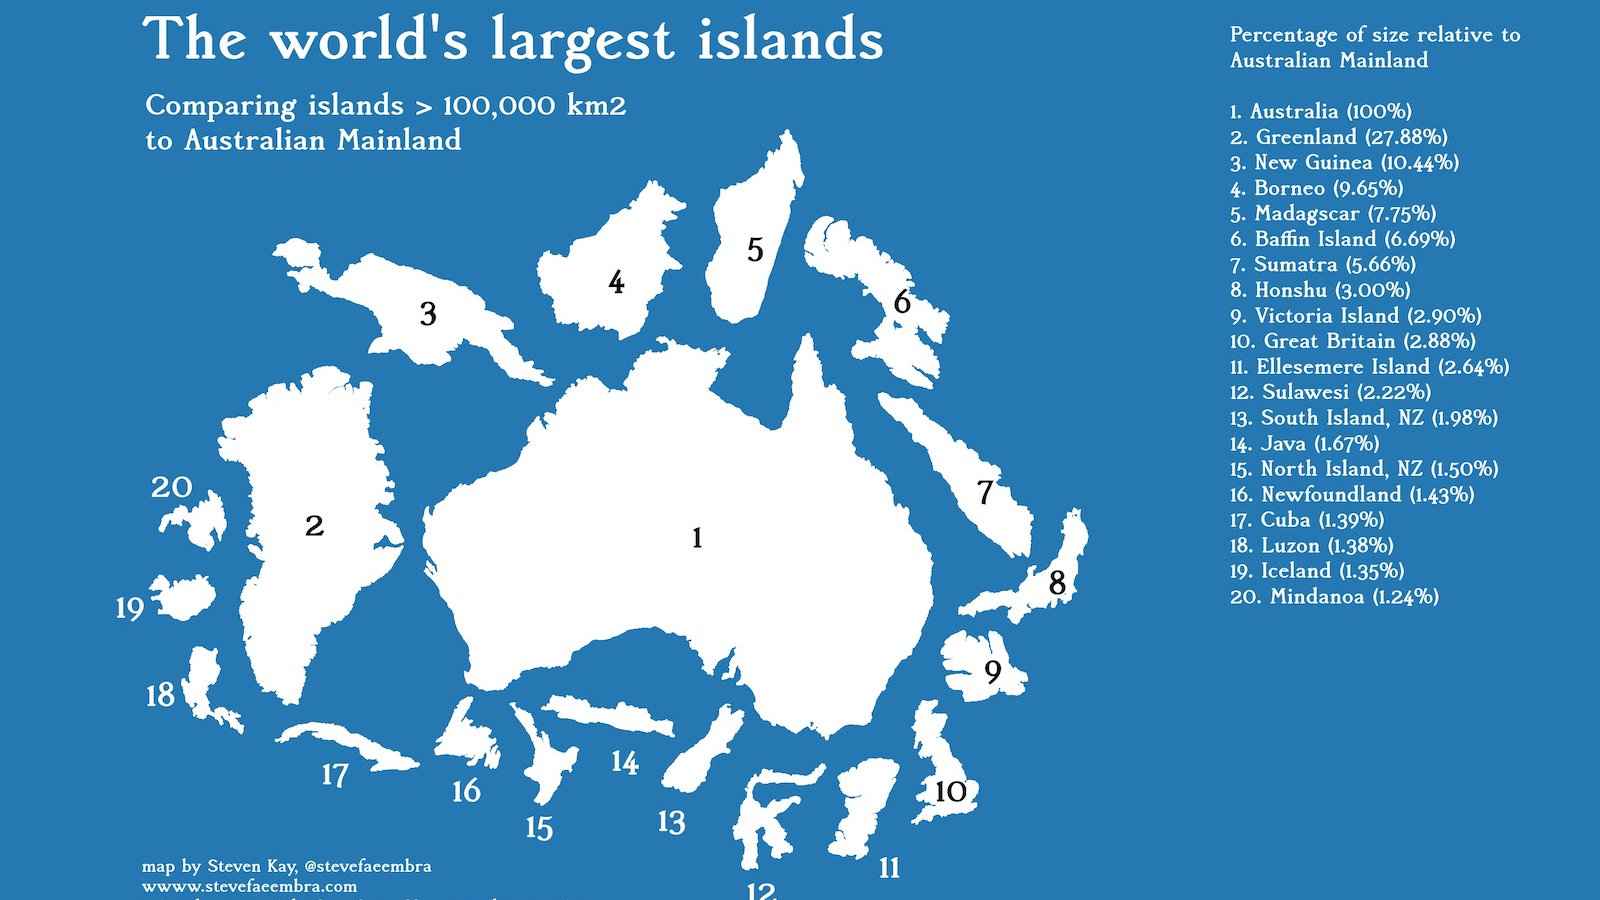 Borneo is the third largest island in the world if you count Australia as a continent rather than an island